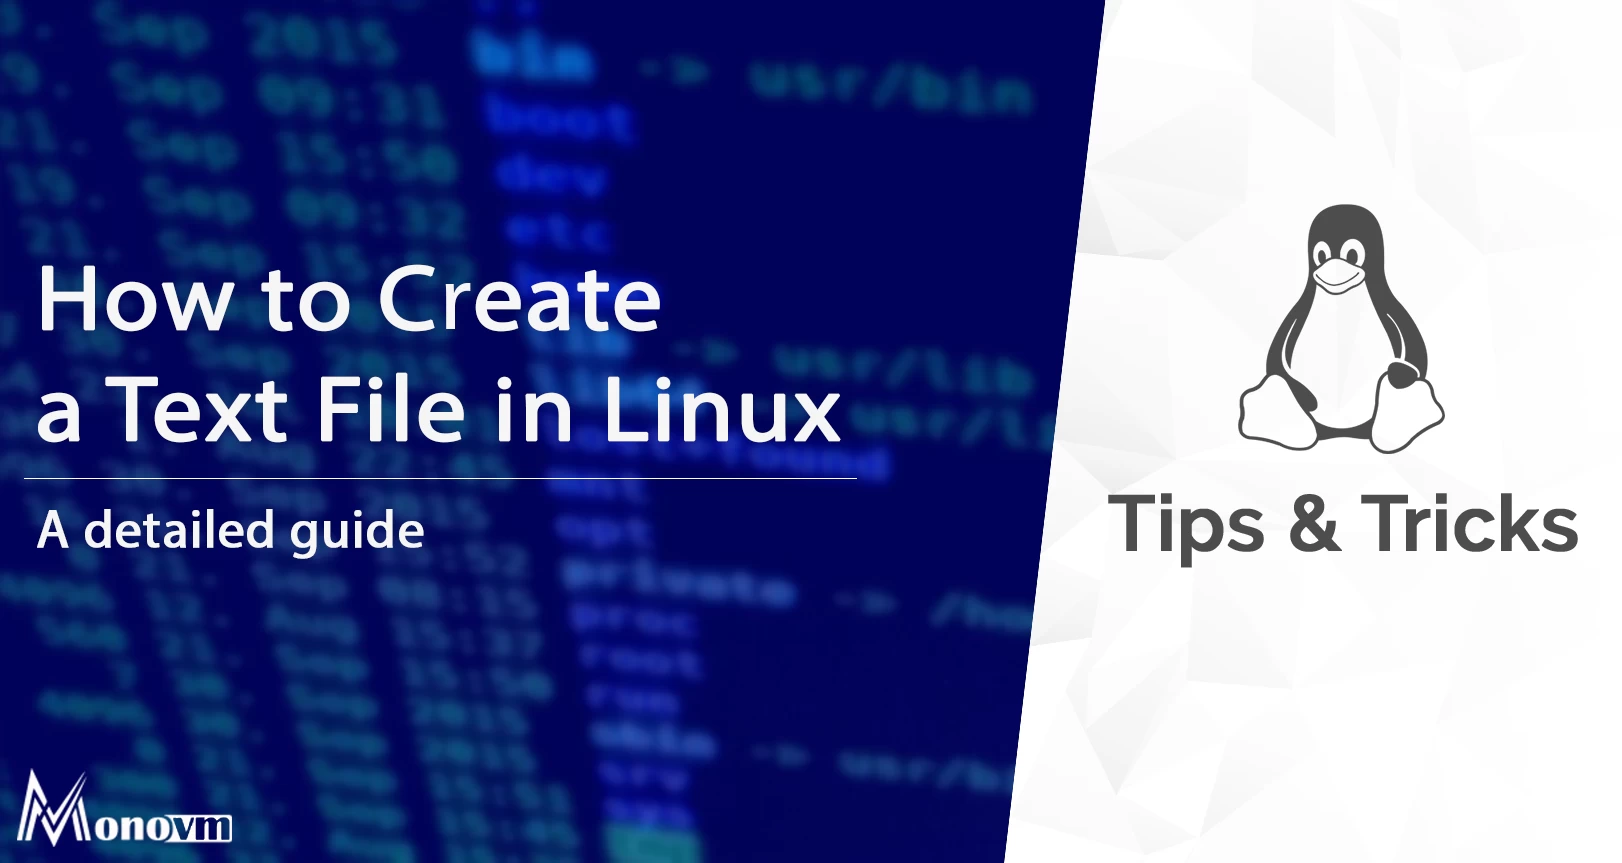 How to Create a File in Linux Using Text Editors and the Terminal